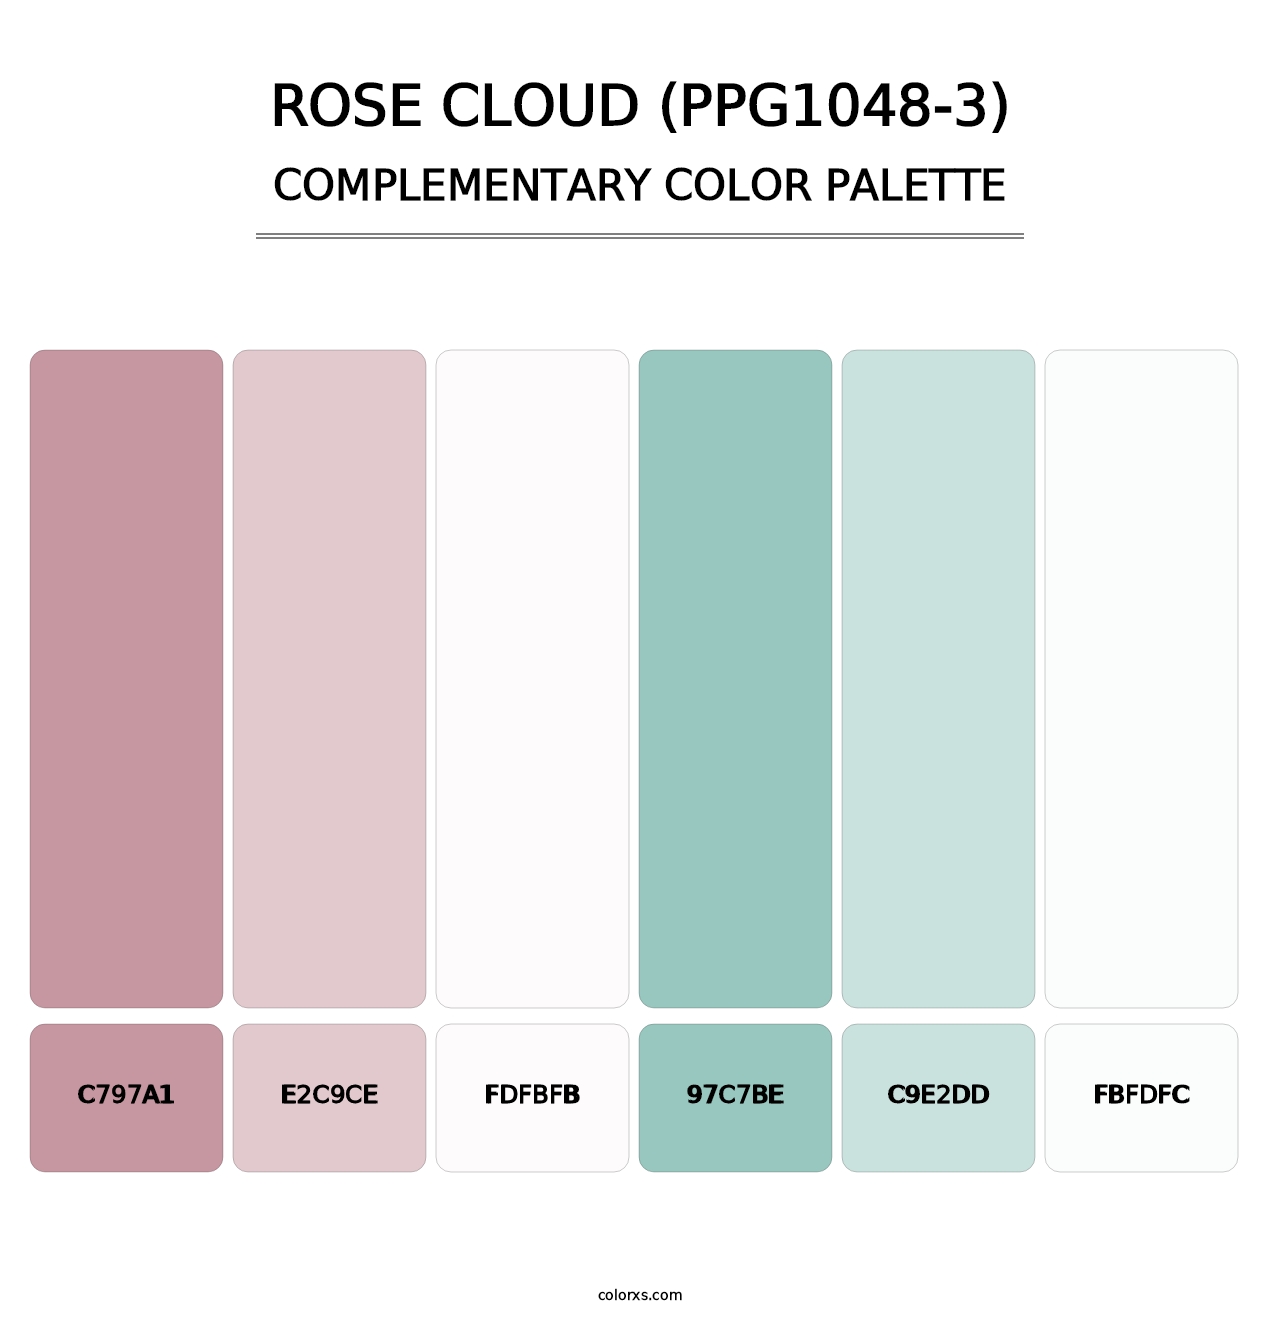 Rose Cloud (PPG1048-3) - Complementary Color Palette